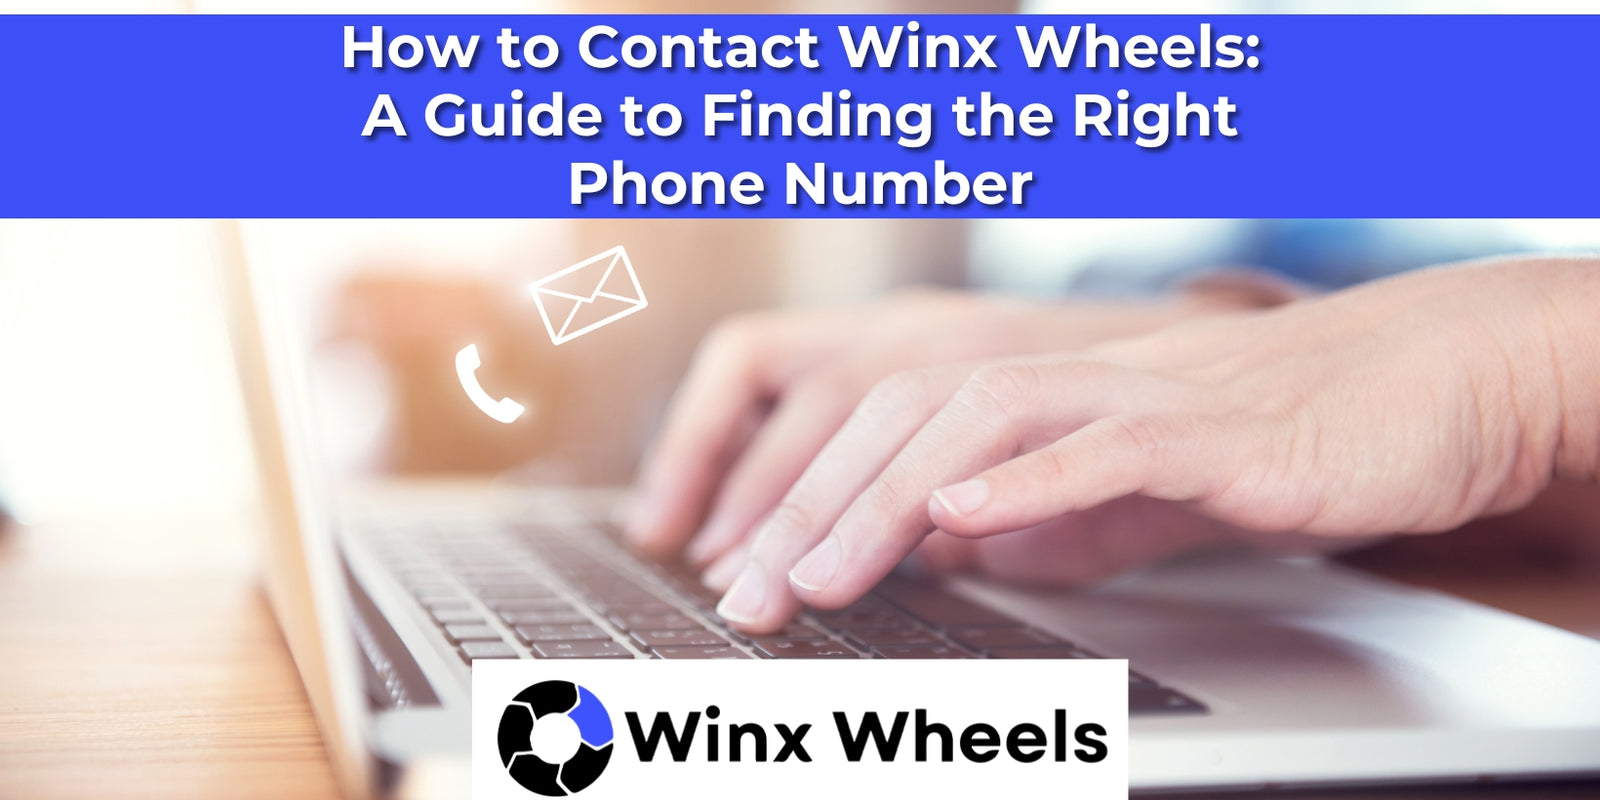 How to Contact Winx Wheels A Guide to Finding the Right Phone Number